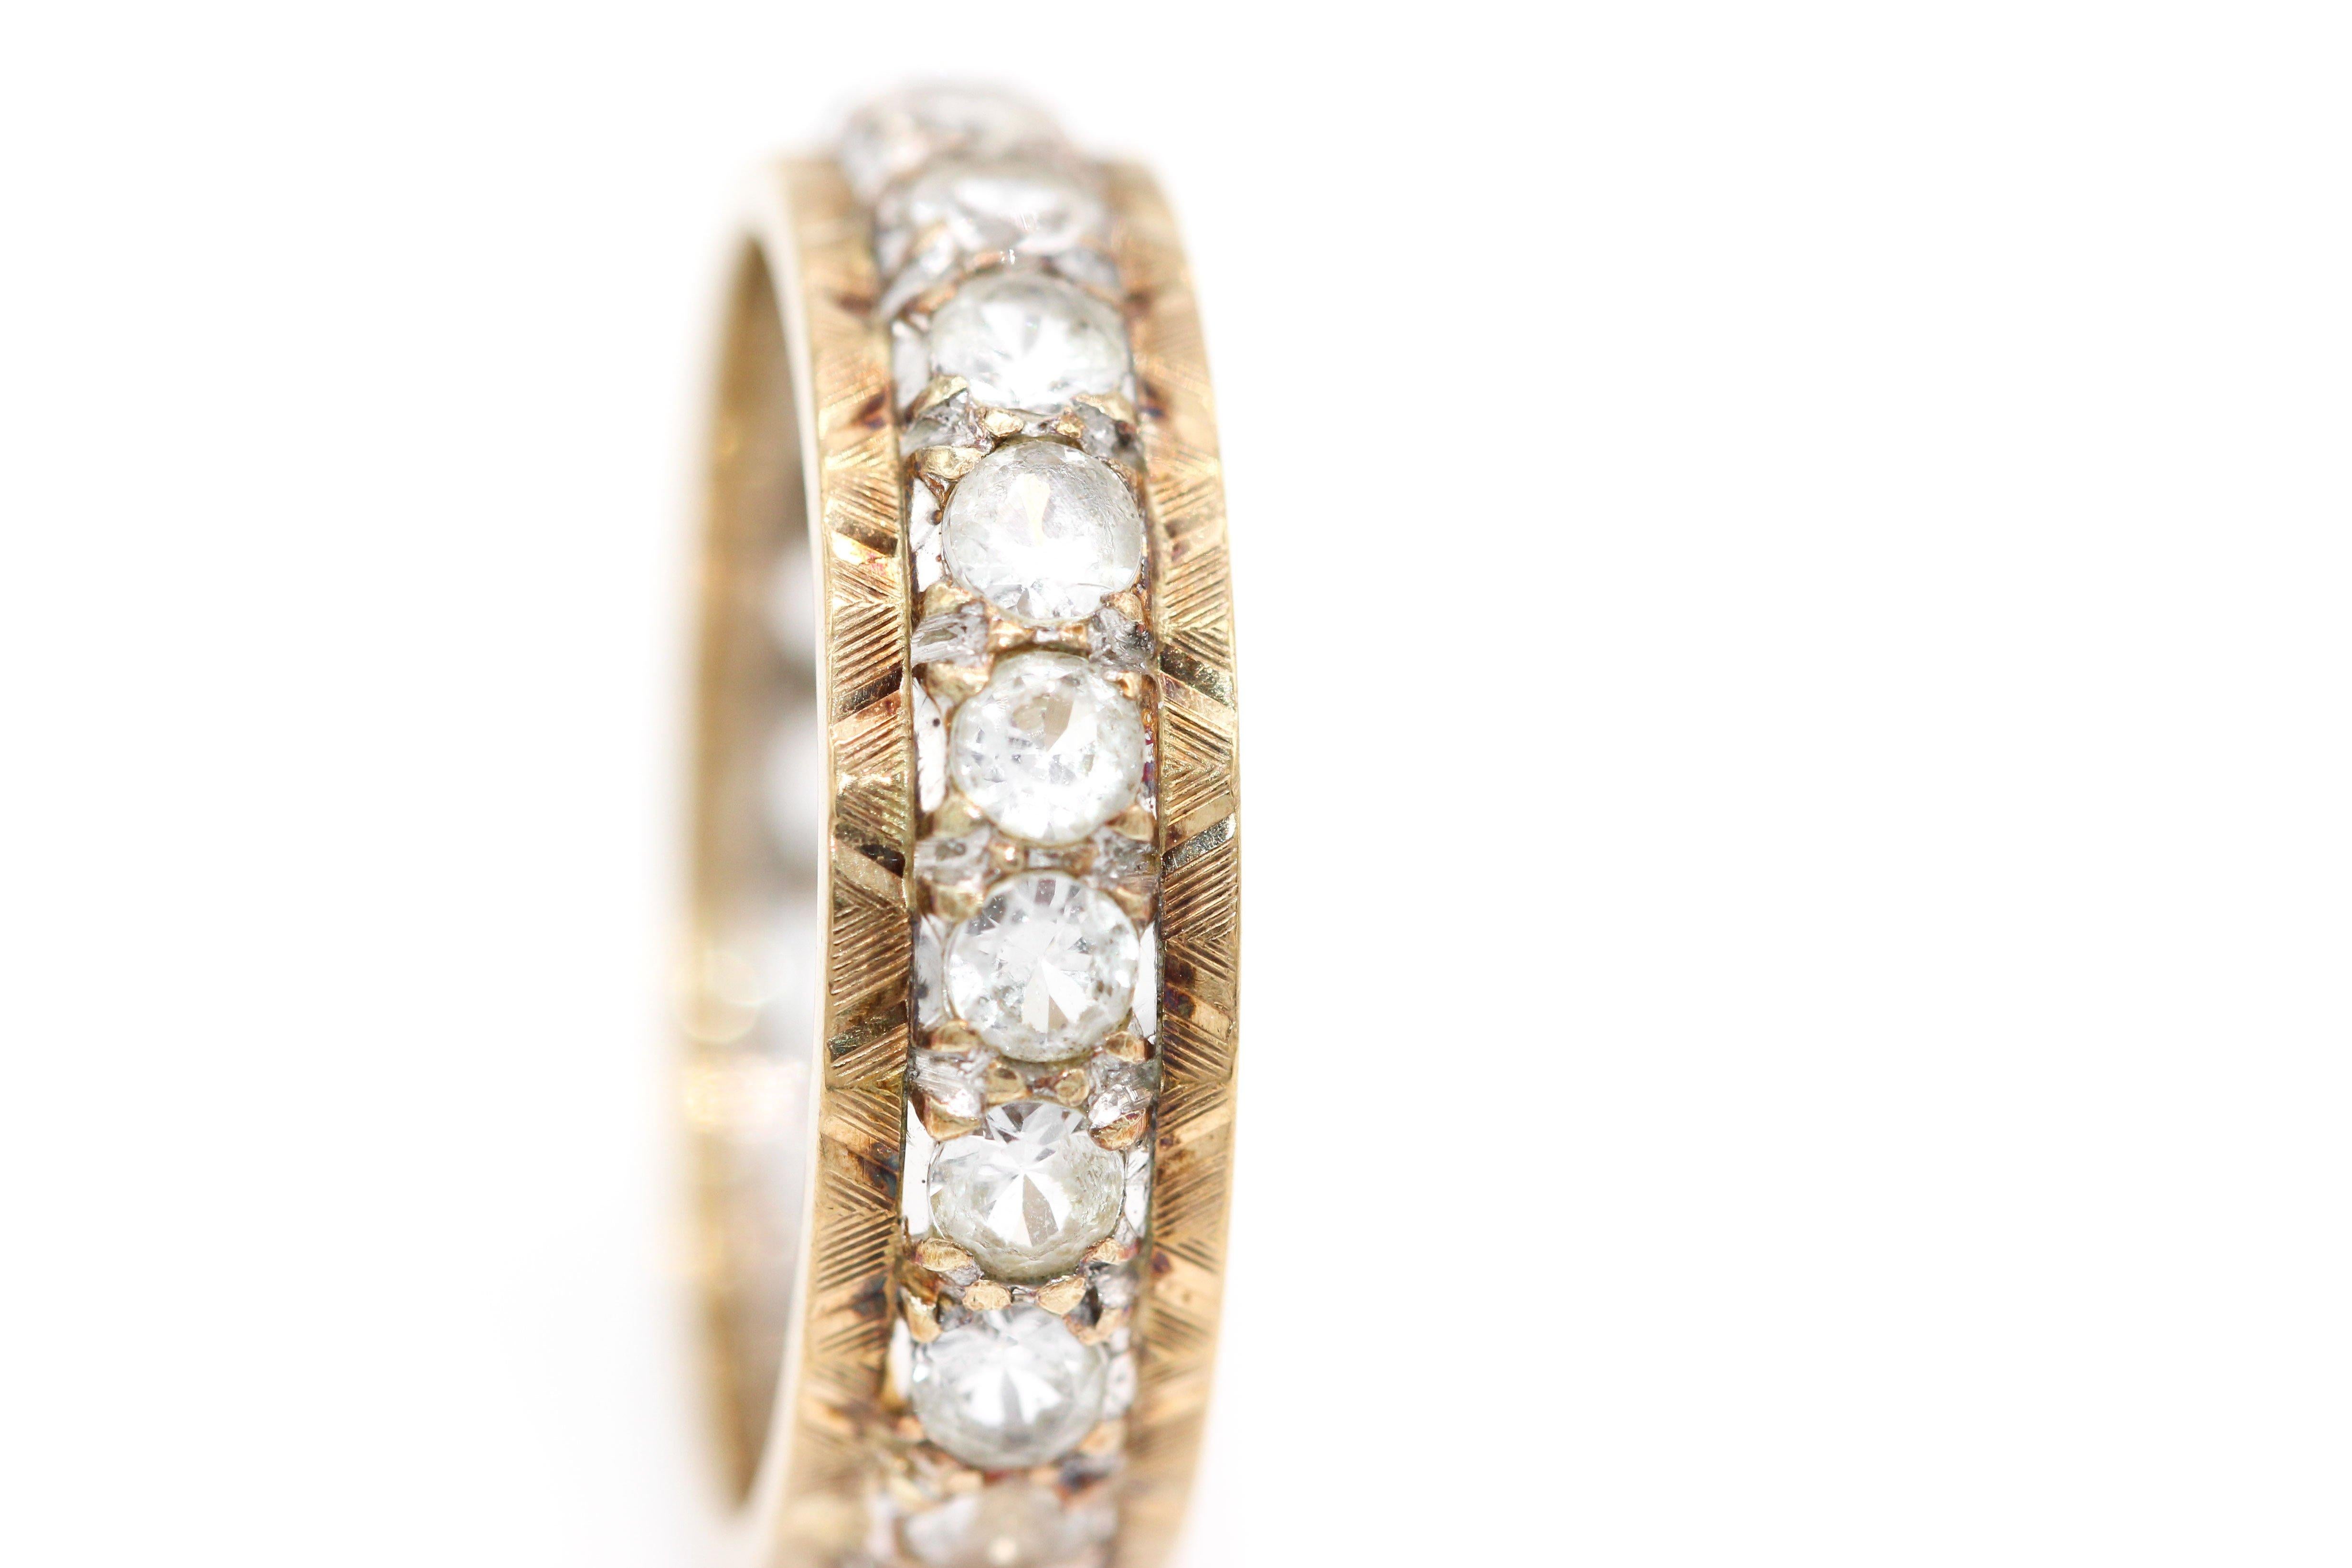 A beautiful vintage yellow and white gold diamond eternity ring. The 22 old cut diamonds set in white gold and with engraved yellow gold shoulders. 
Size   UK  Q.  
          USA   8.0

Width of band 6mm.
Hallmarked 9Kt  Birmingham UK   1964-65